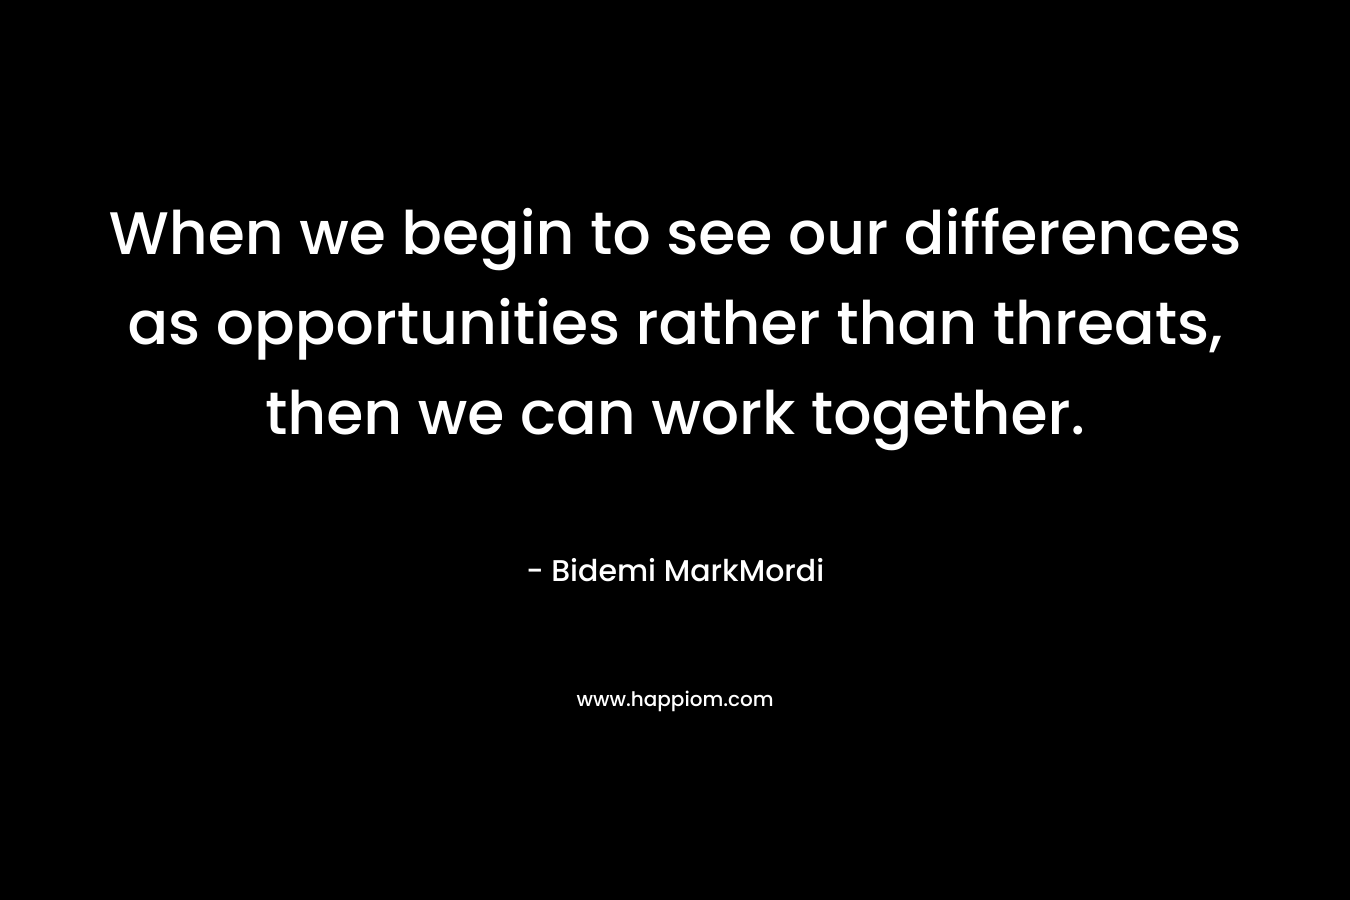 When we begin to see our differences as opportunities rather than threats, then we can work together. – Bidemi MarkMordi